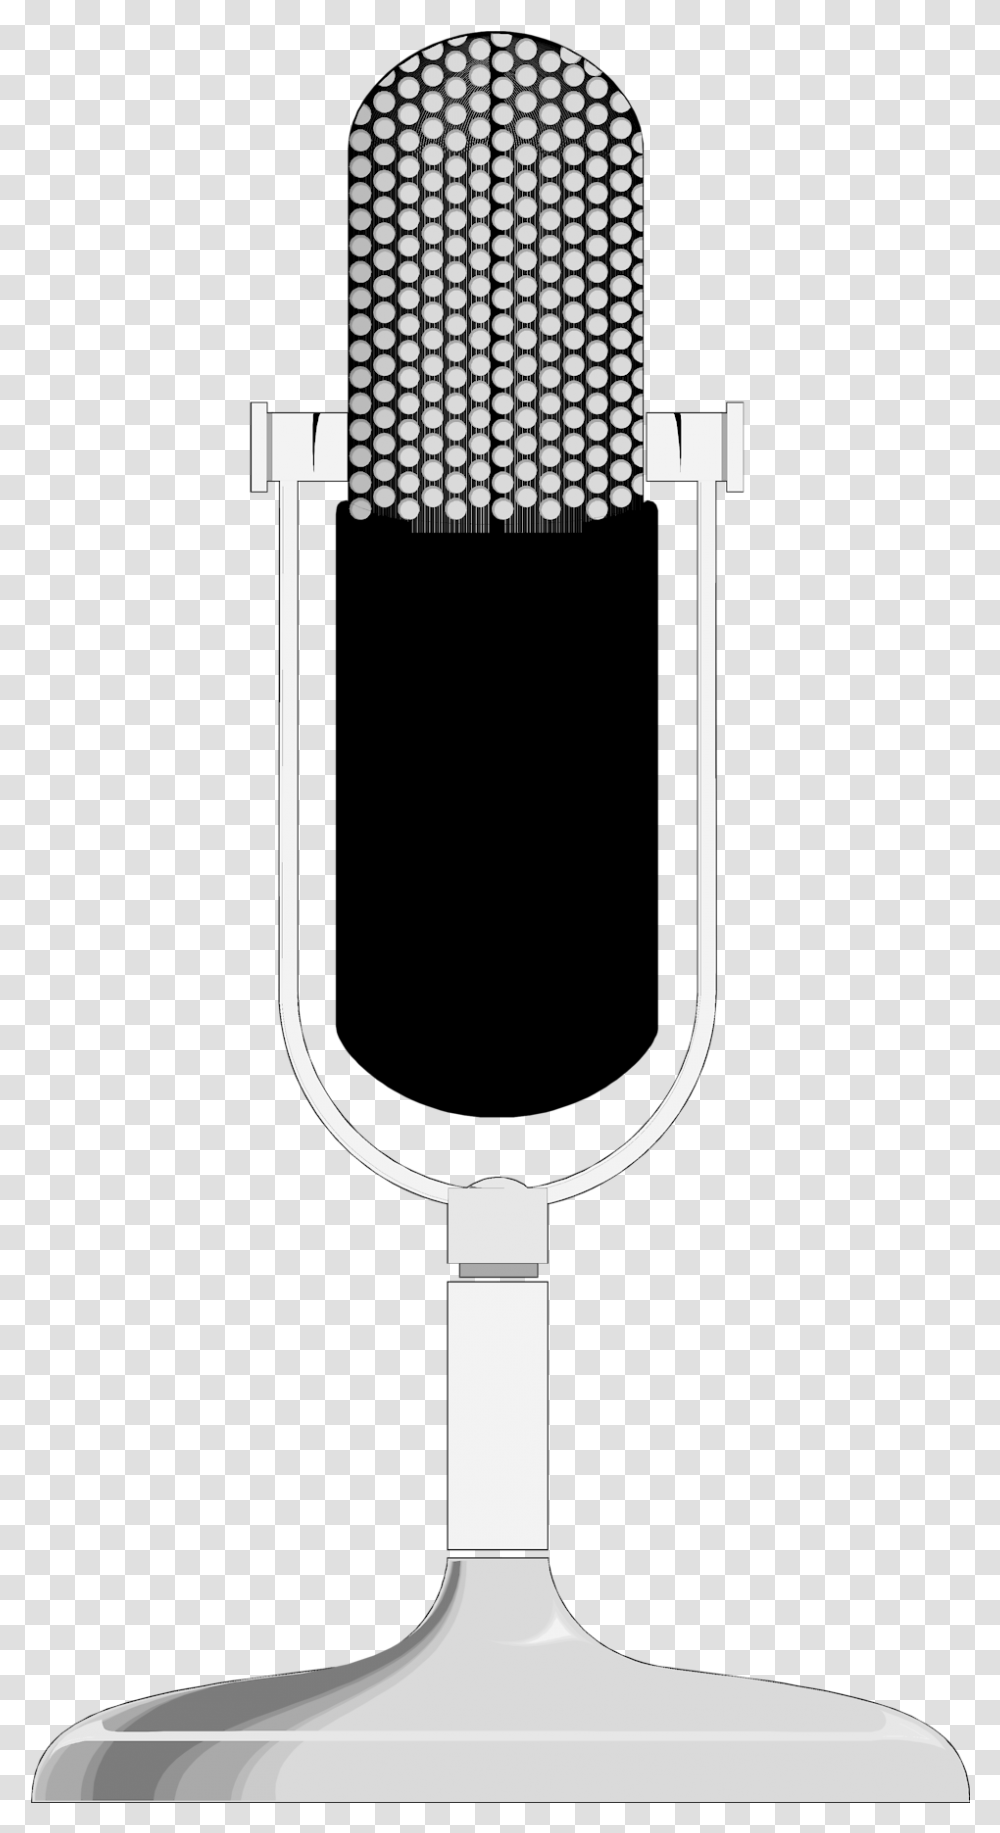 Free Stock Photo Illustration Of A Clipart Microphone Drawing, Lamp, Armor, Security Transparent Png